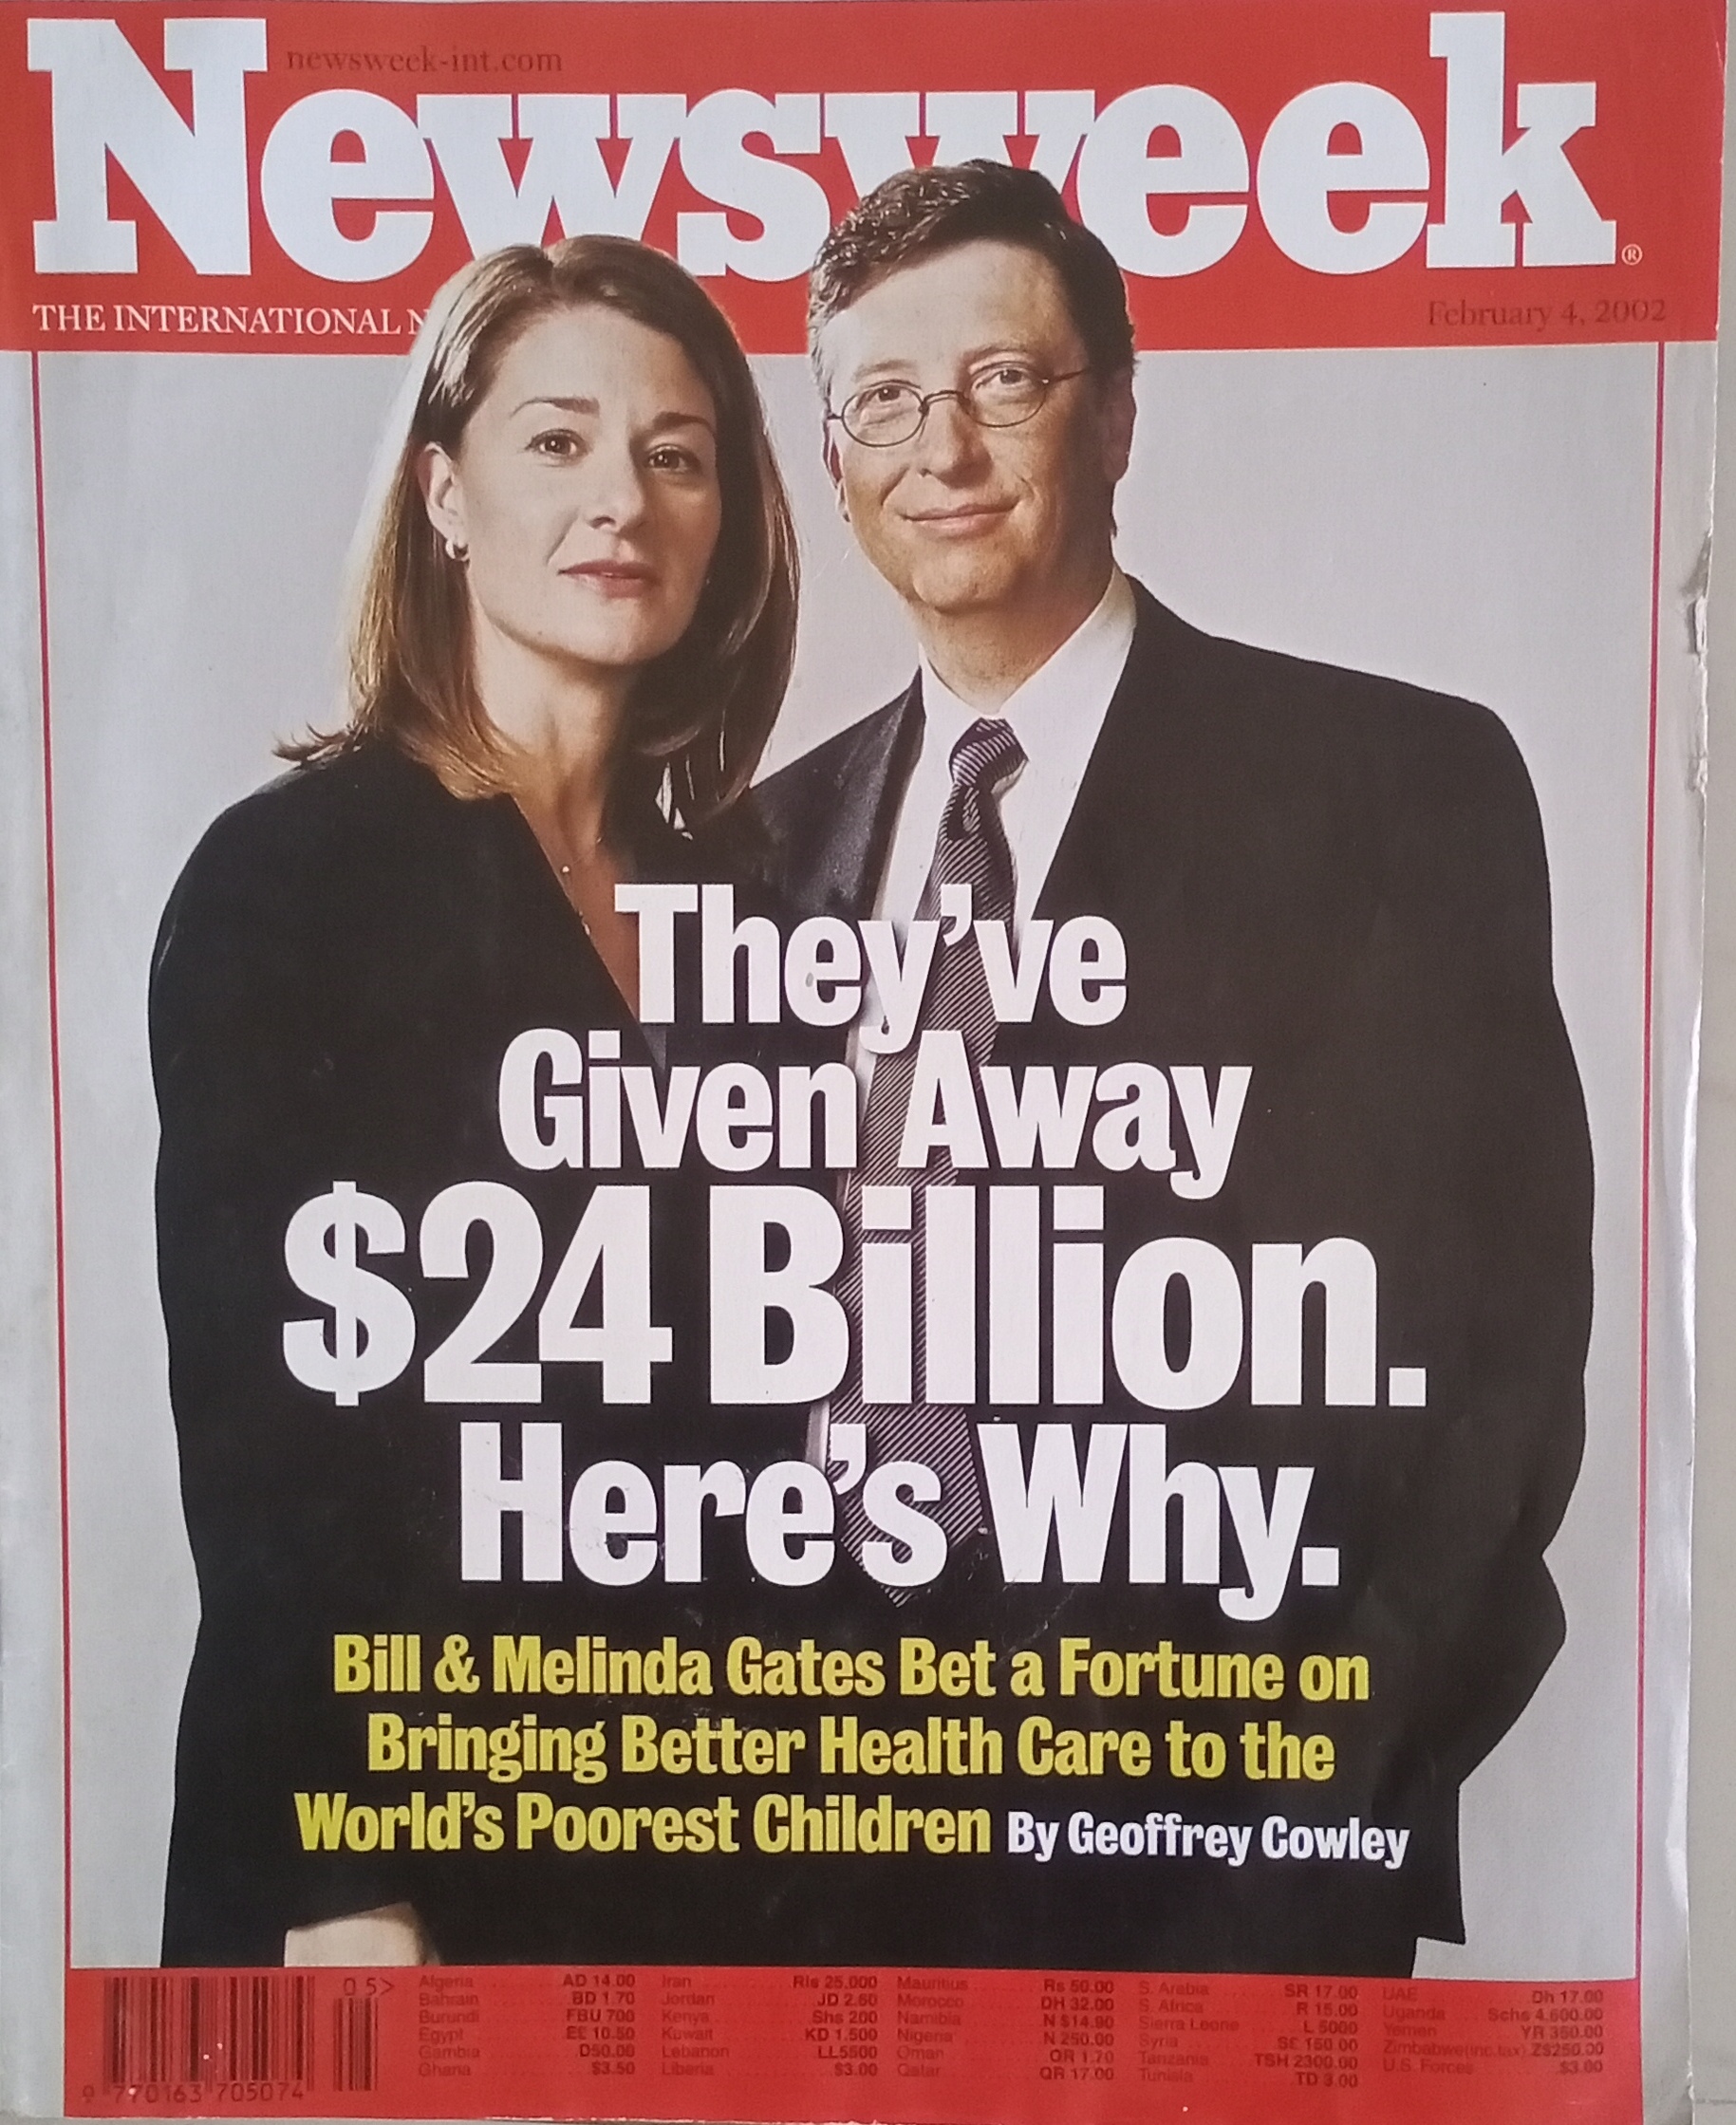 What Happens to Global Health Governance After the Break-up of Bill and Melinda Gates?